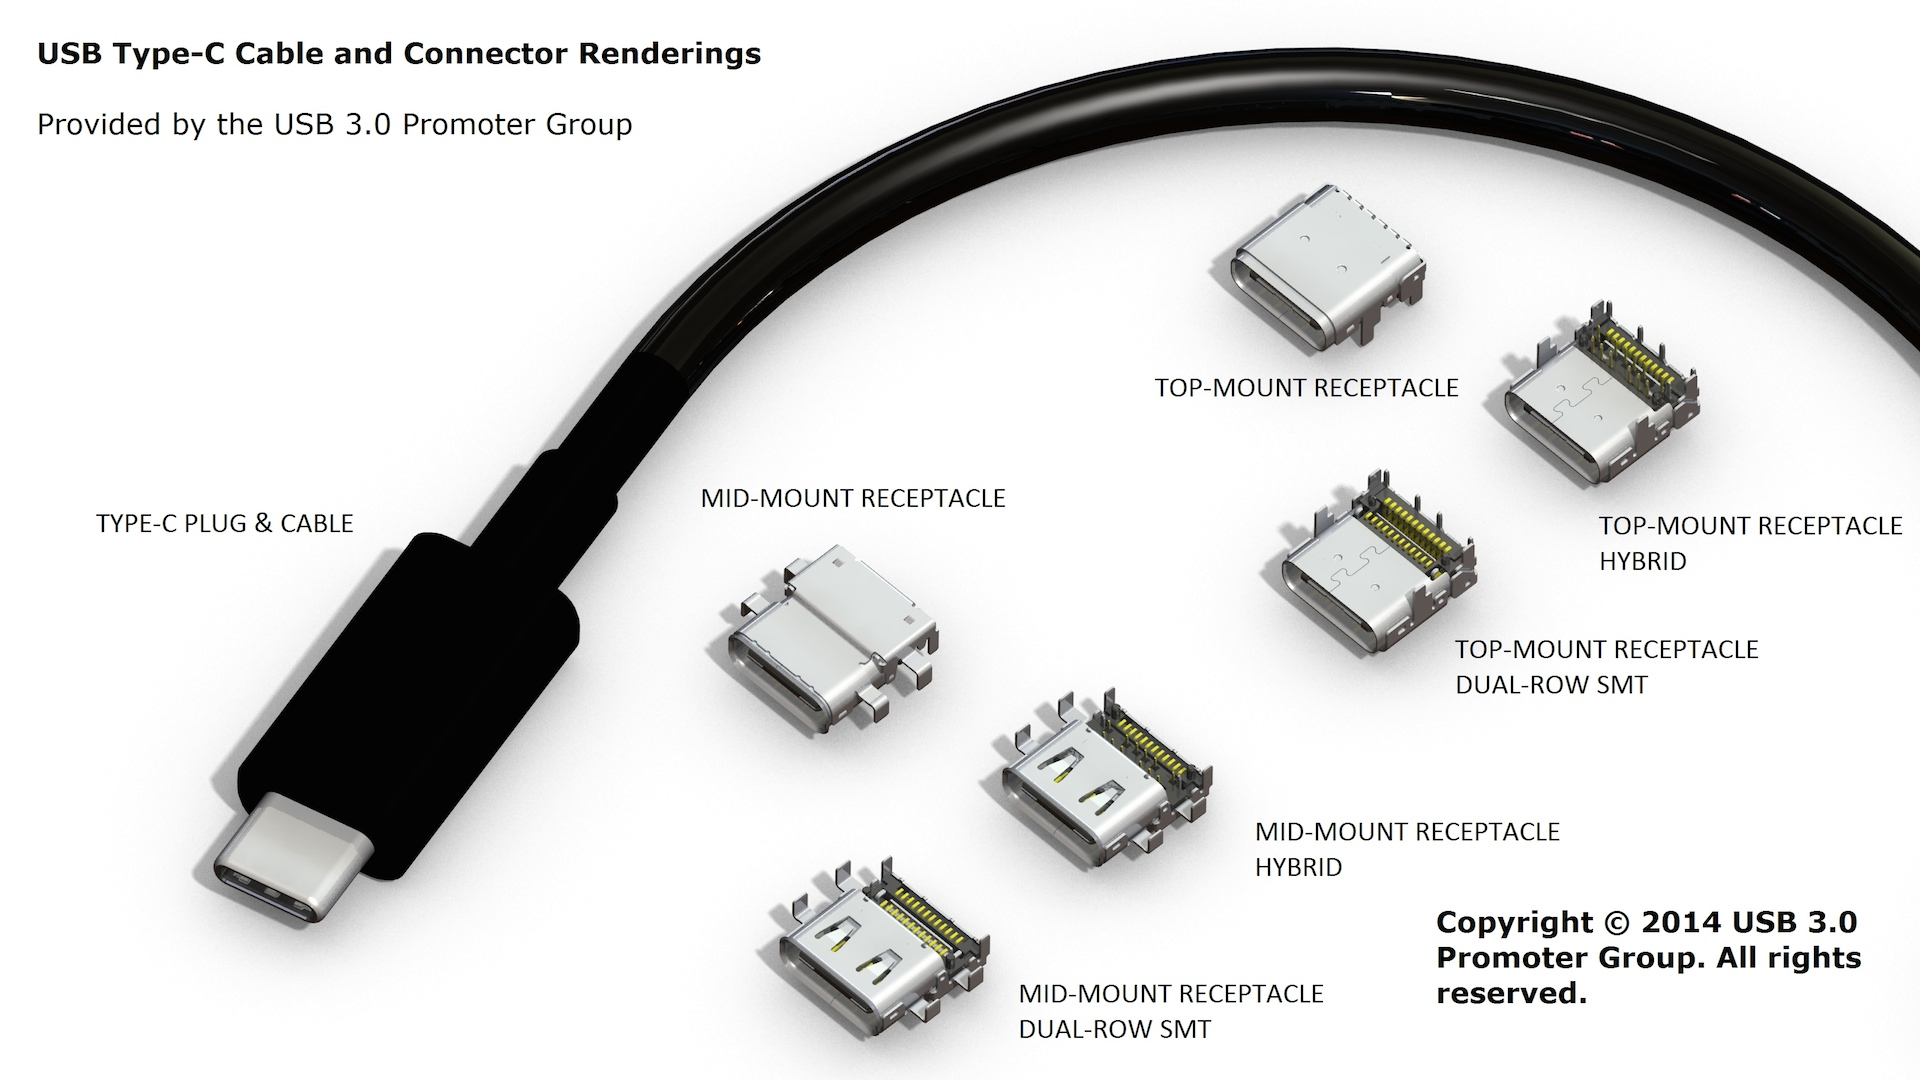 Tiny, reversible USB Type-C connector finalized | Ars Technica